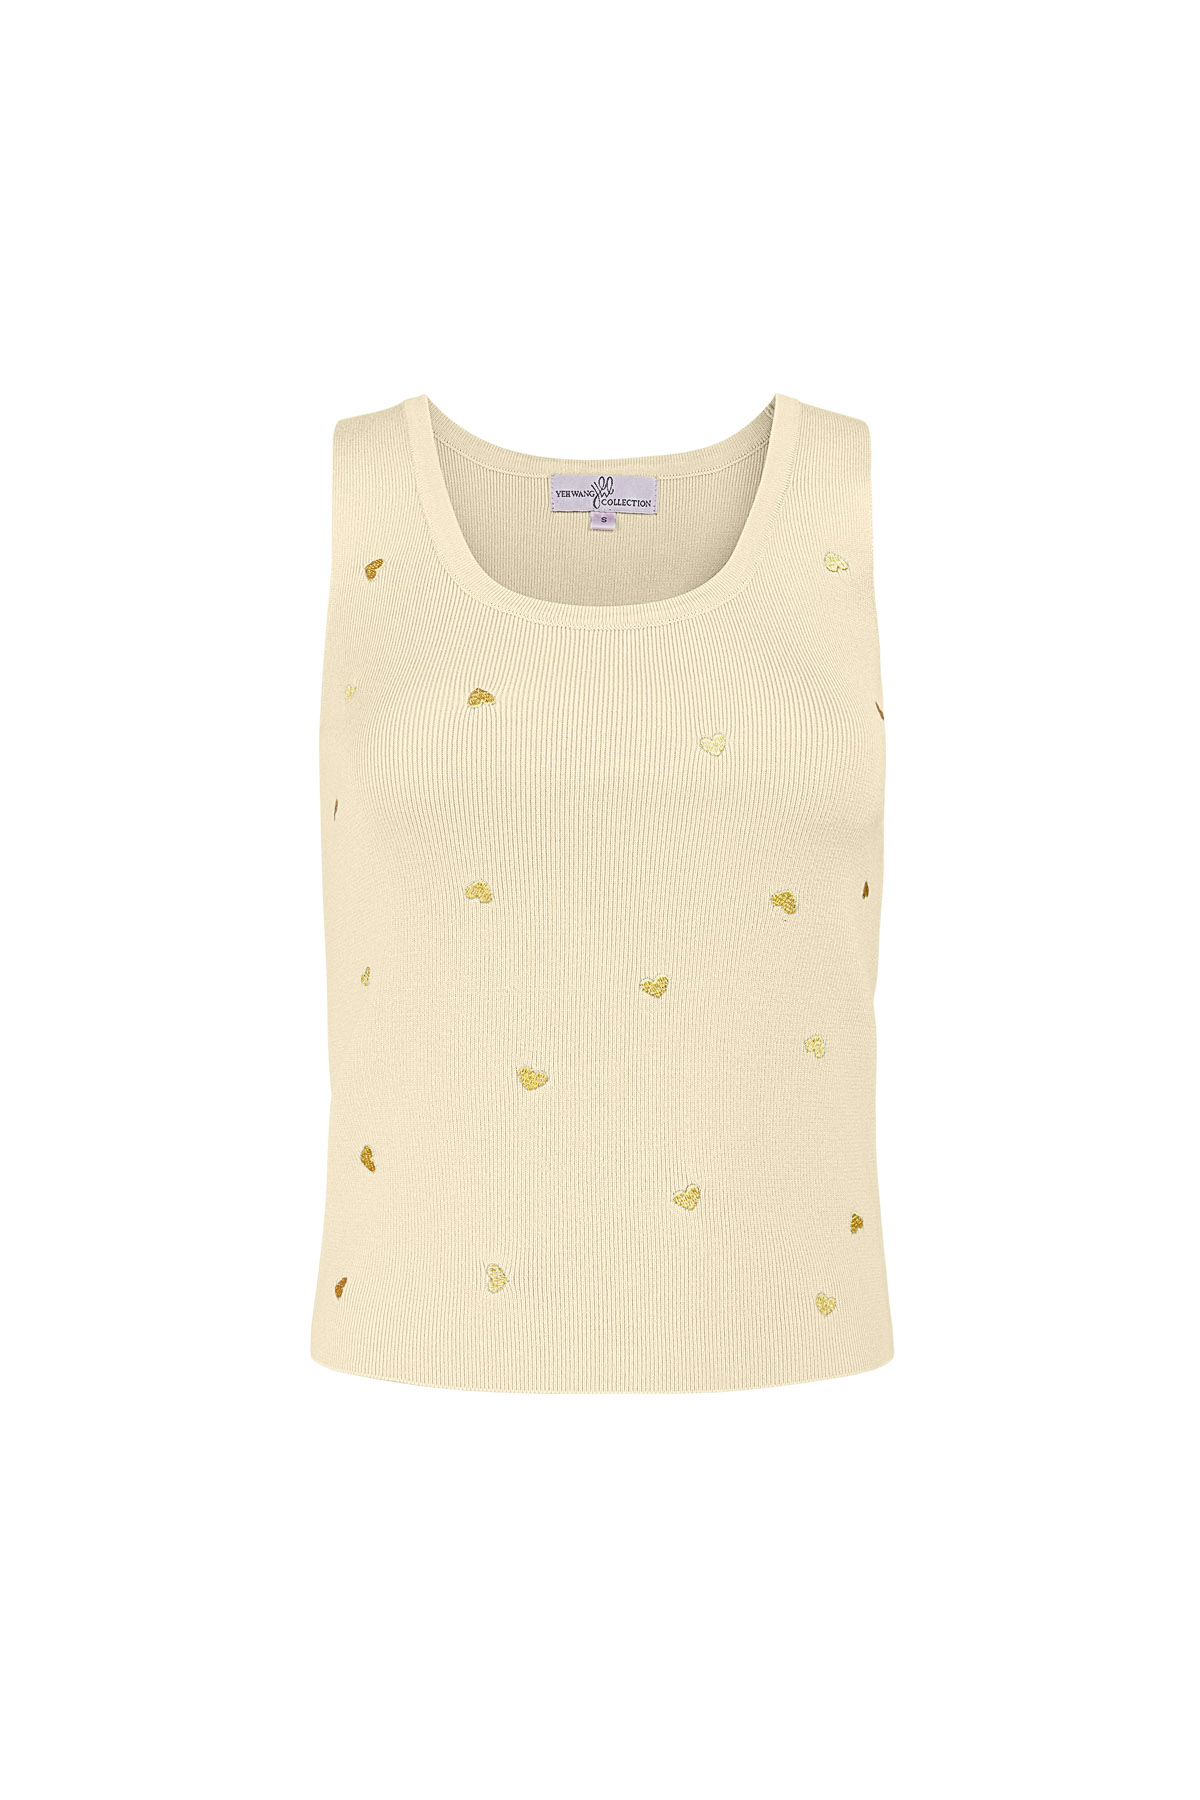 Sleeveless top with gold heart details large – beige h5 